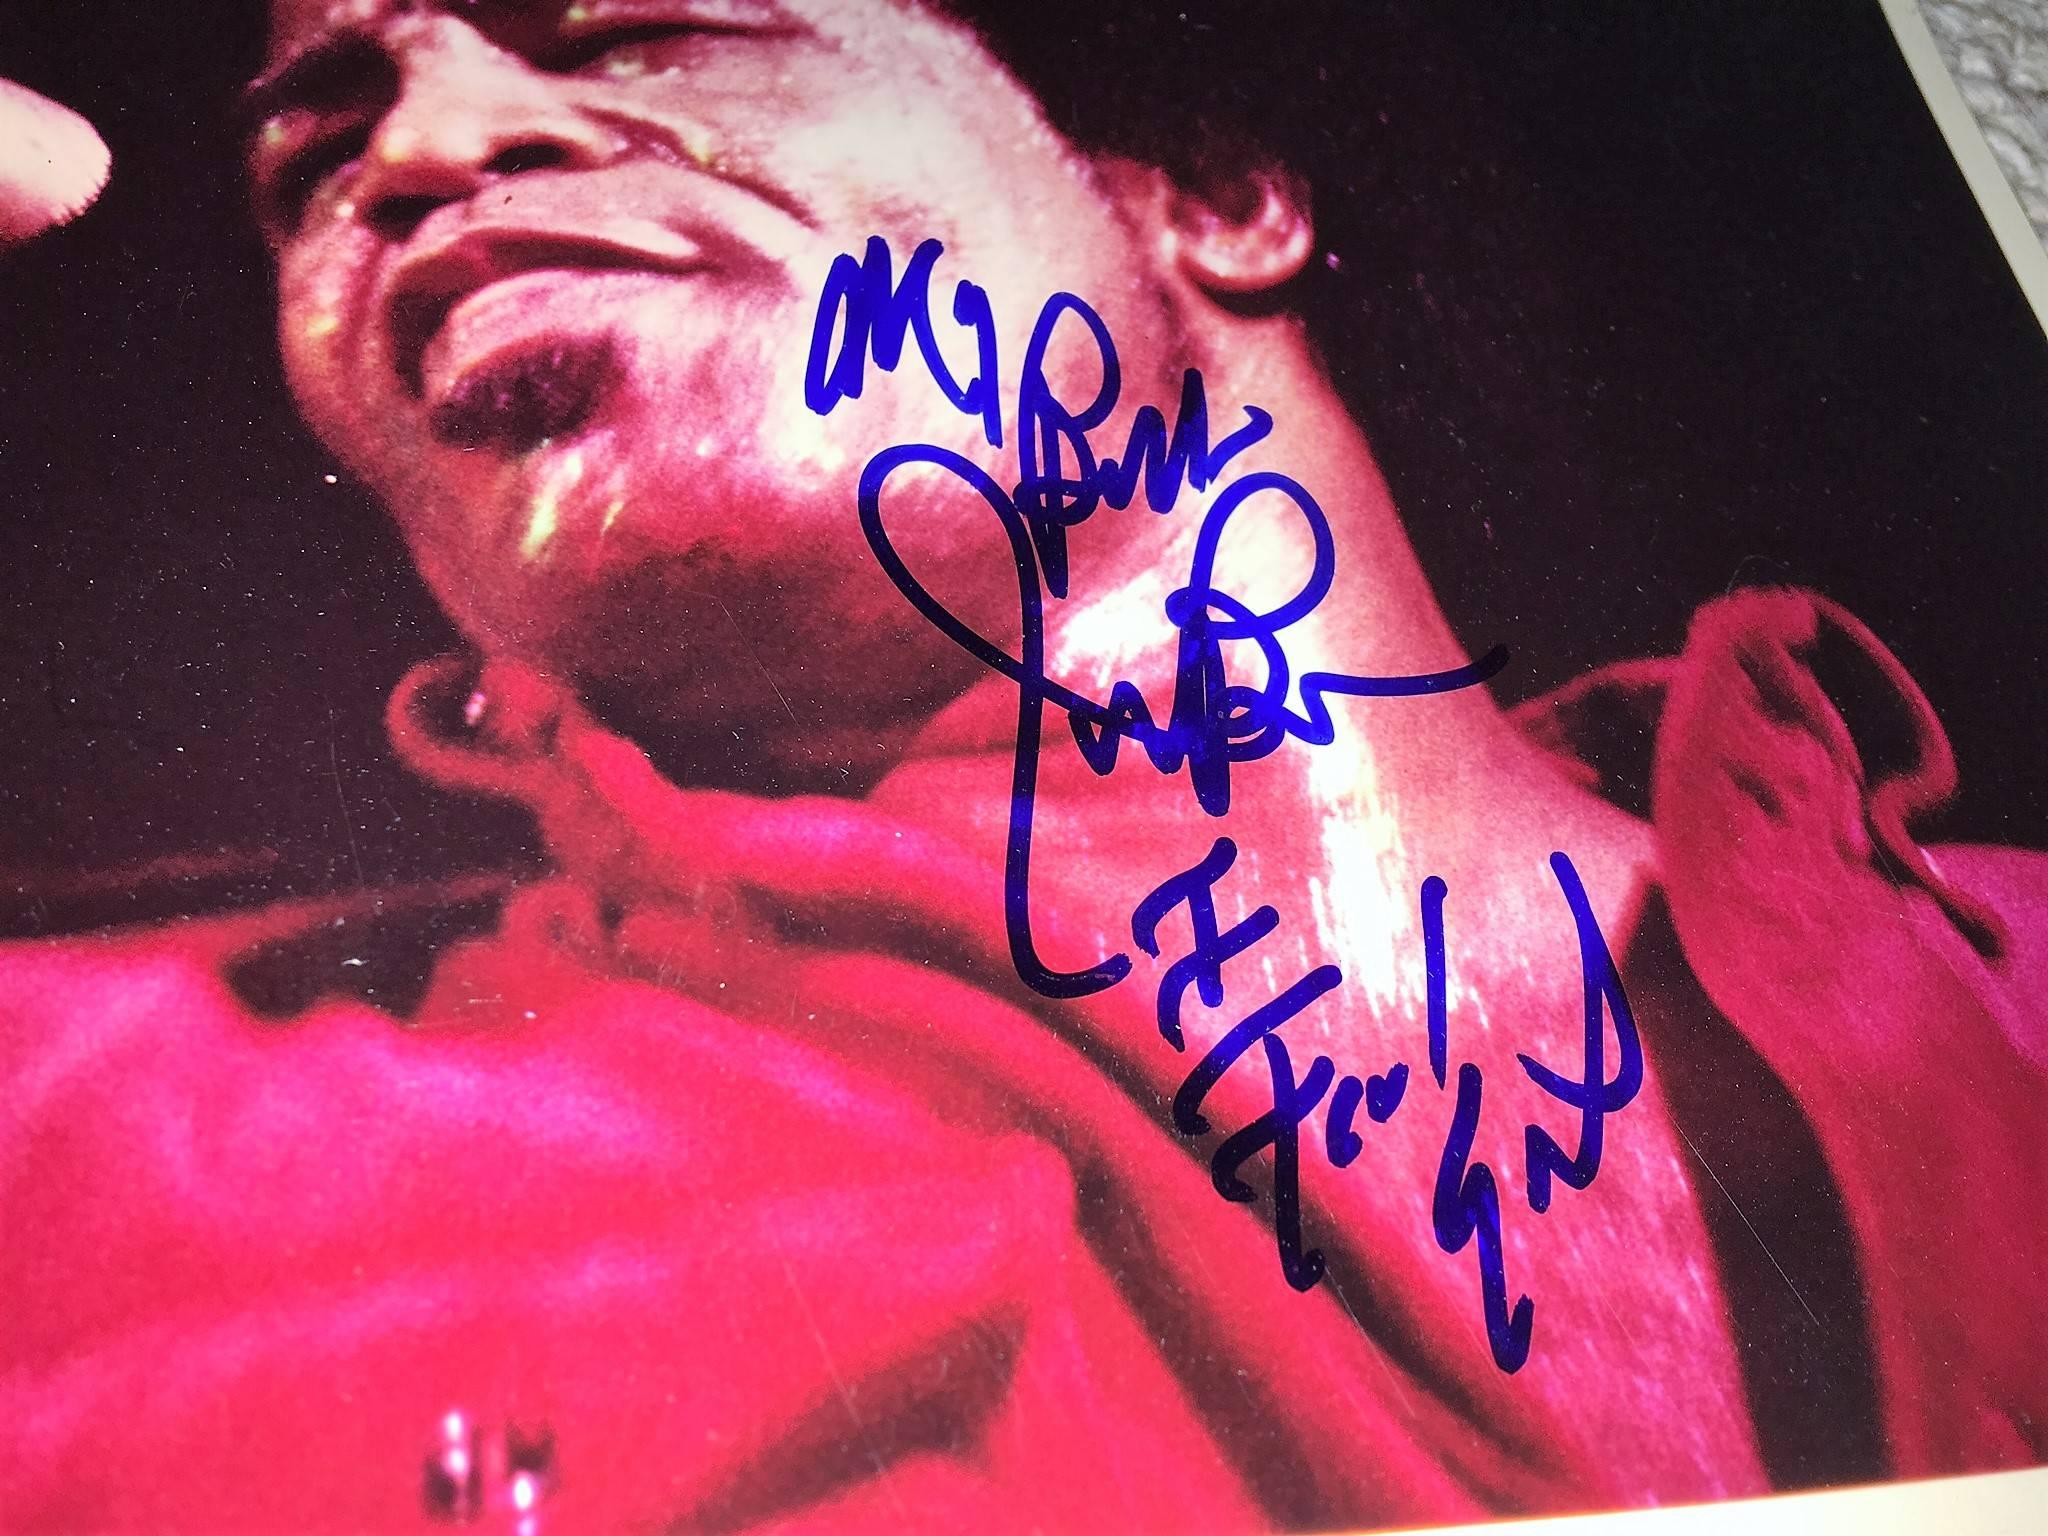 James Brown autographed photo obtained in person by the seller in the 1990s
Inscribed my best, James Brown "I Feel Good".